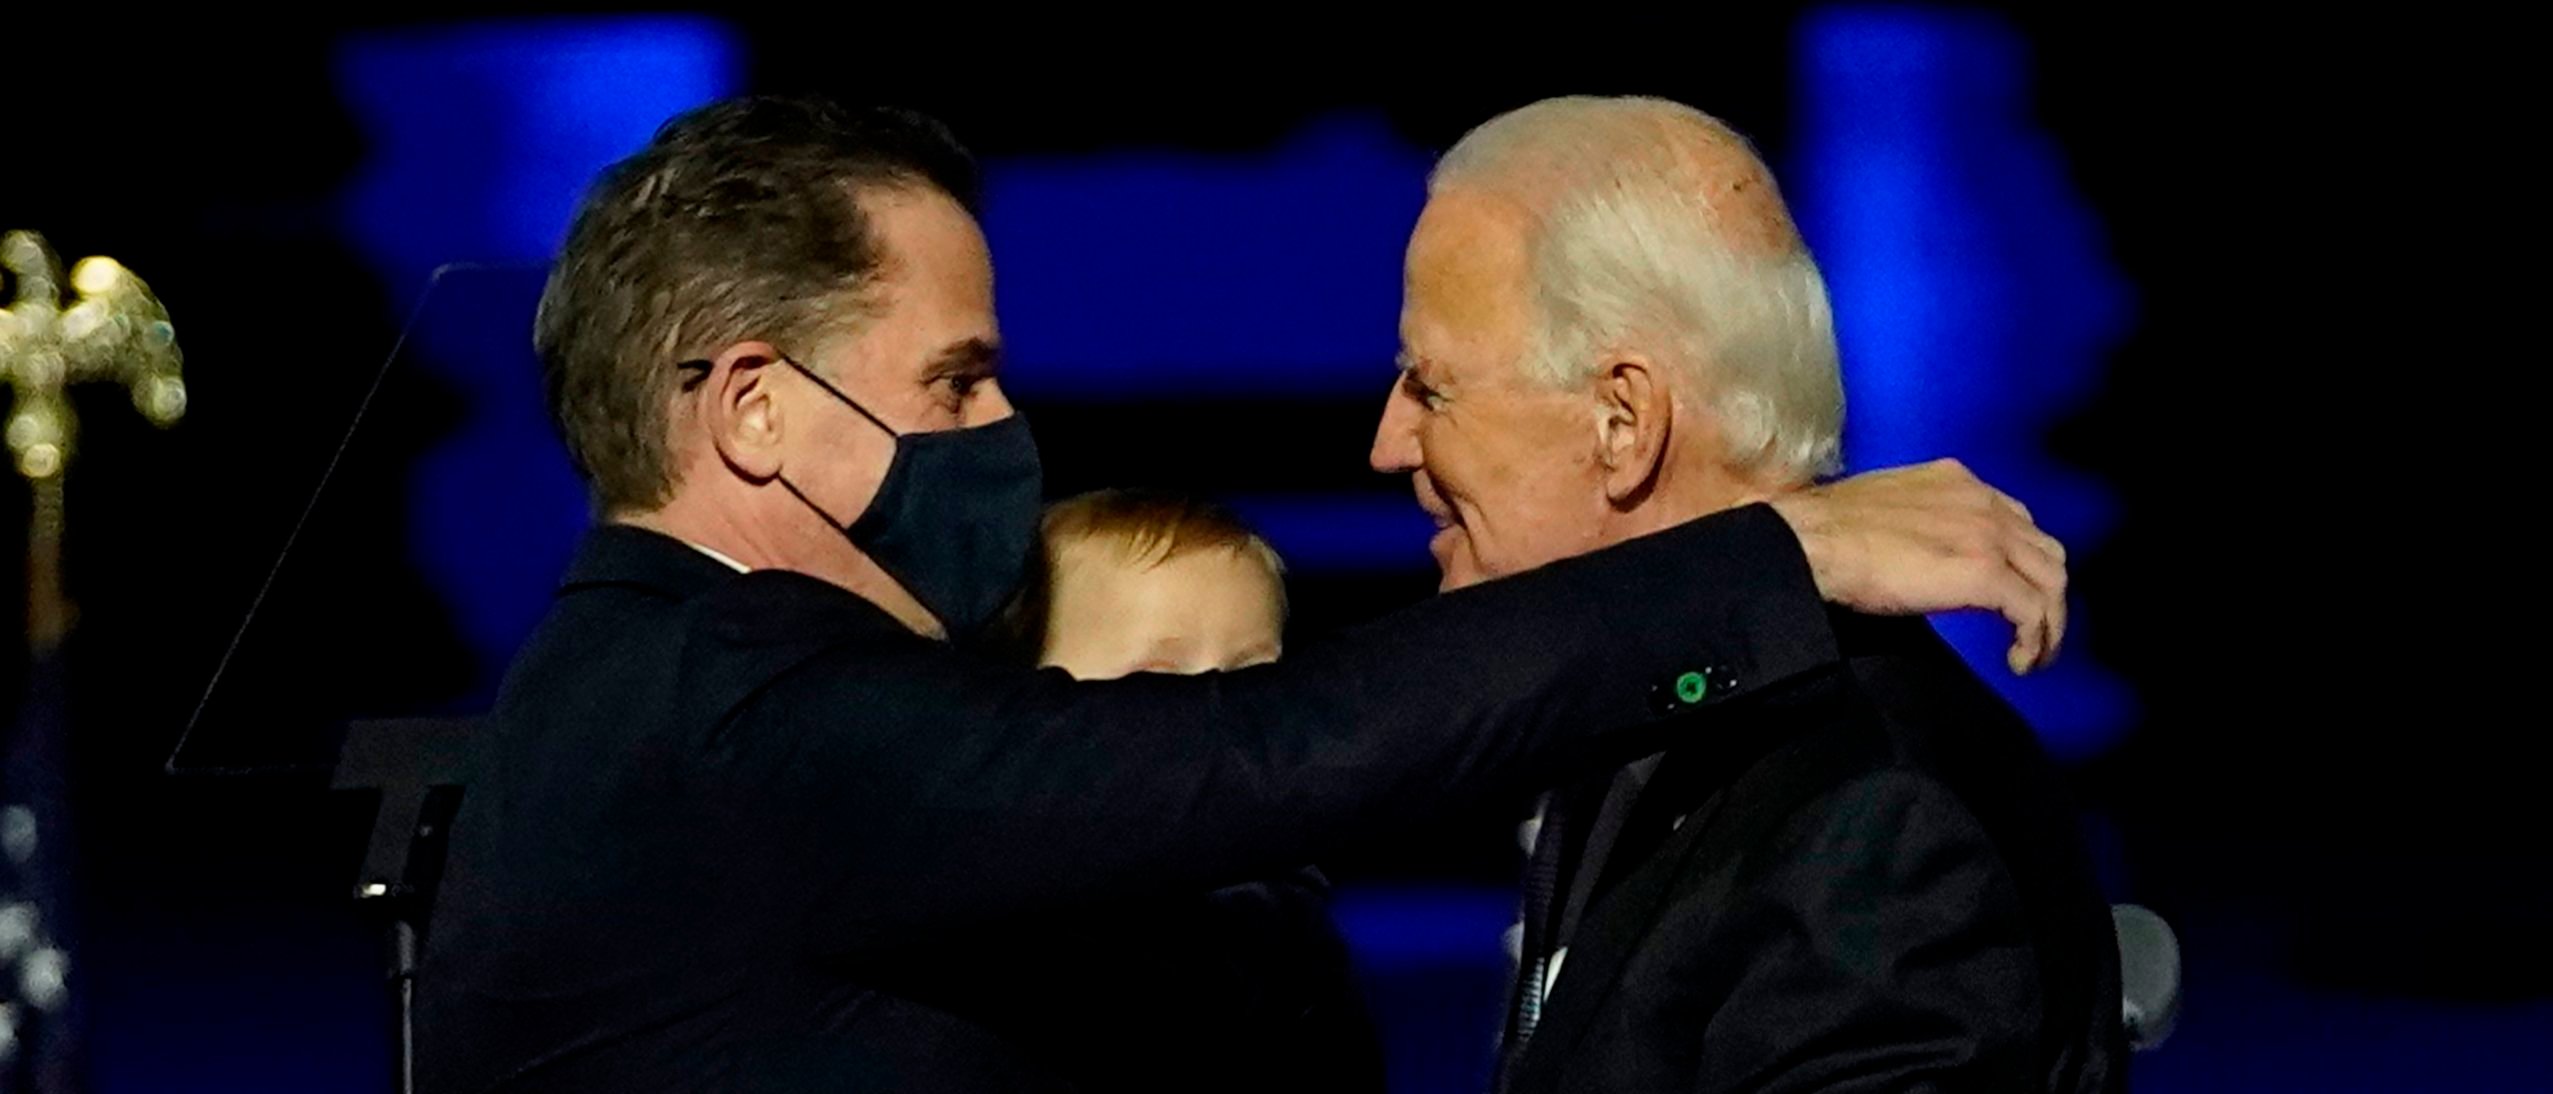 Hunter Biden’s New Book ‘Beautiful Things’ Listed As No. 1 Under ‘Chinese Biographies’ On Amazon | The Daily Caller